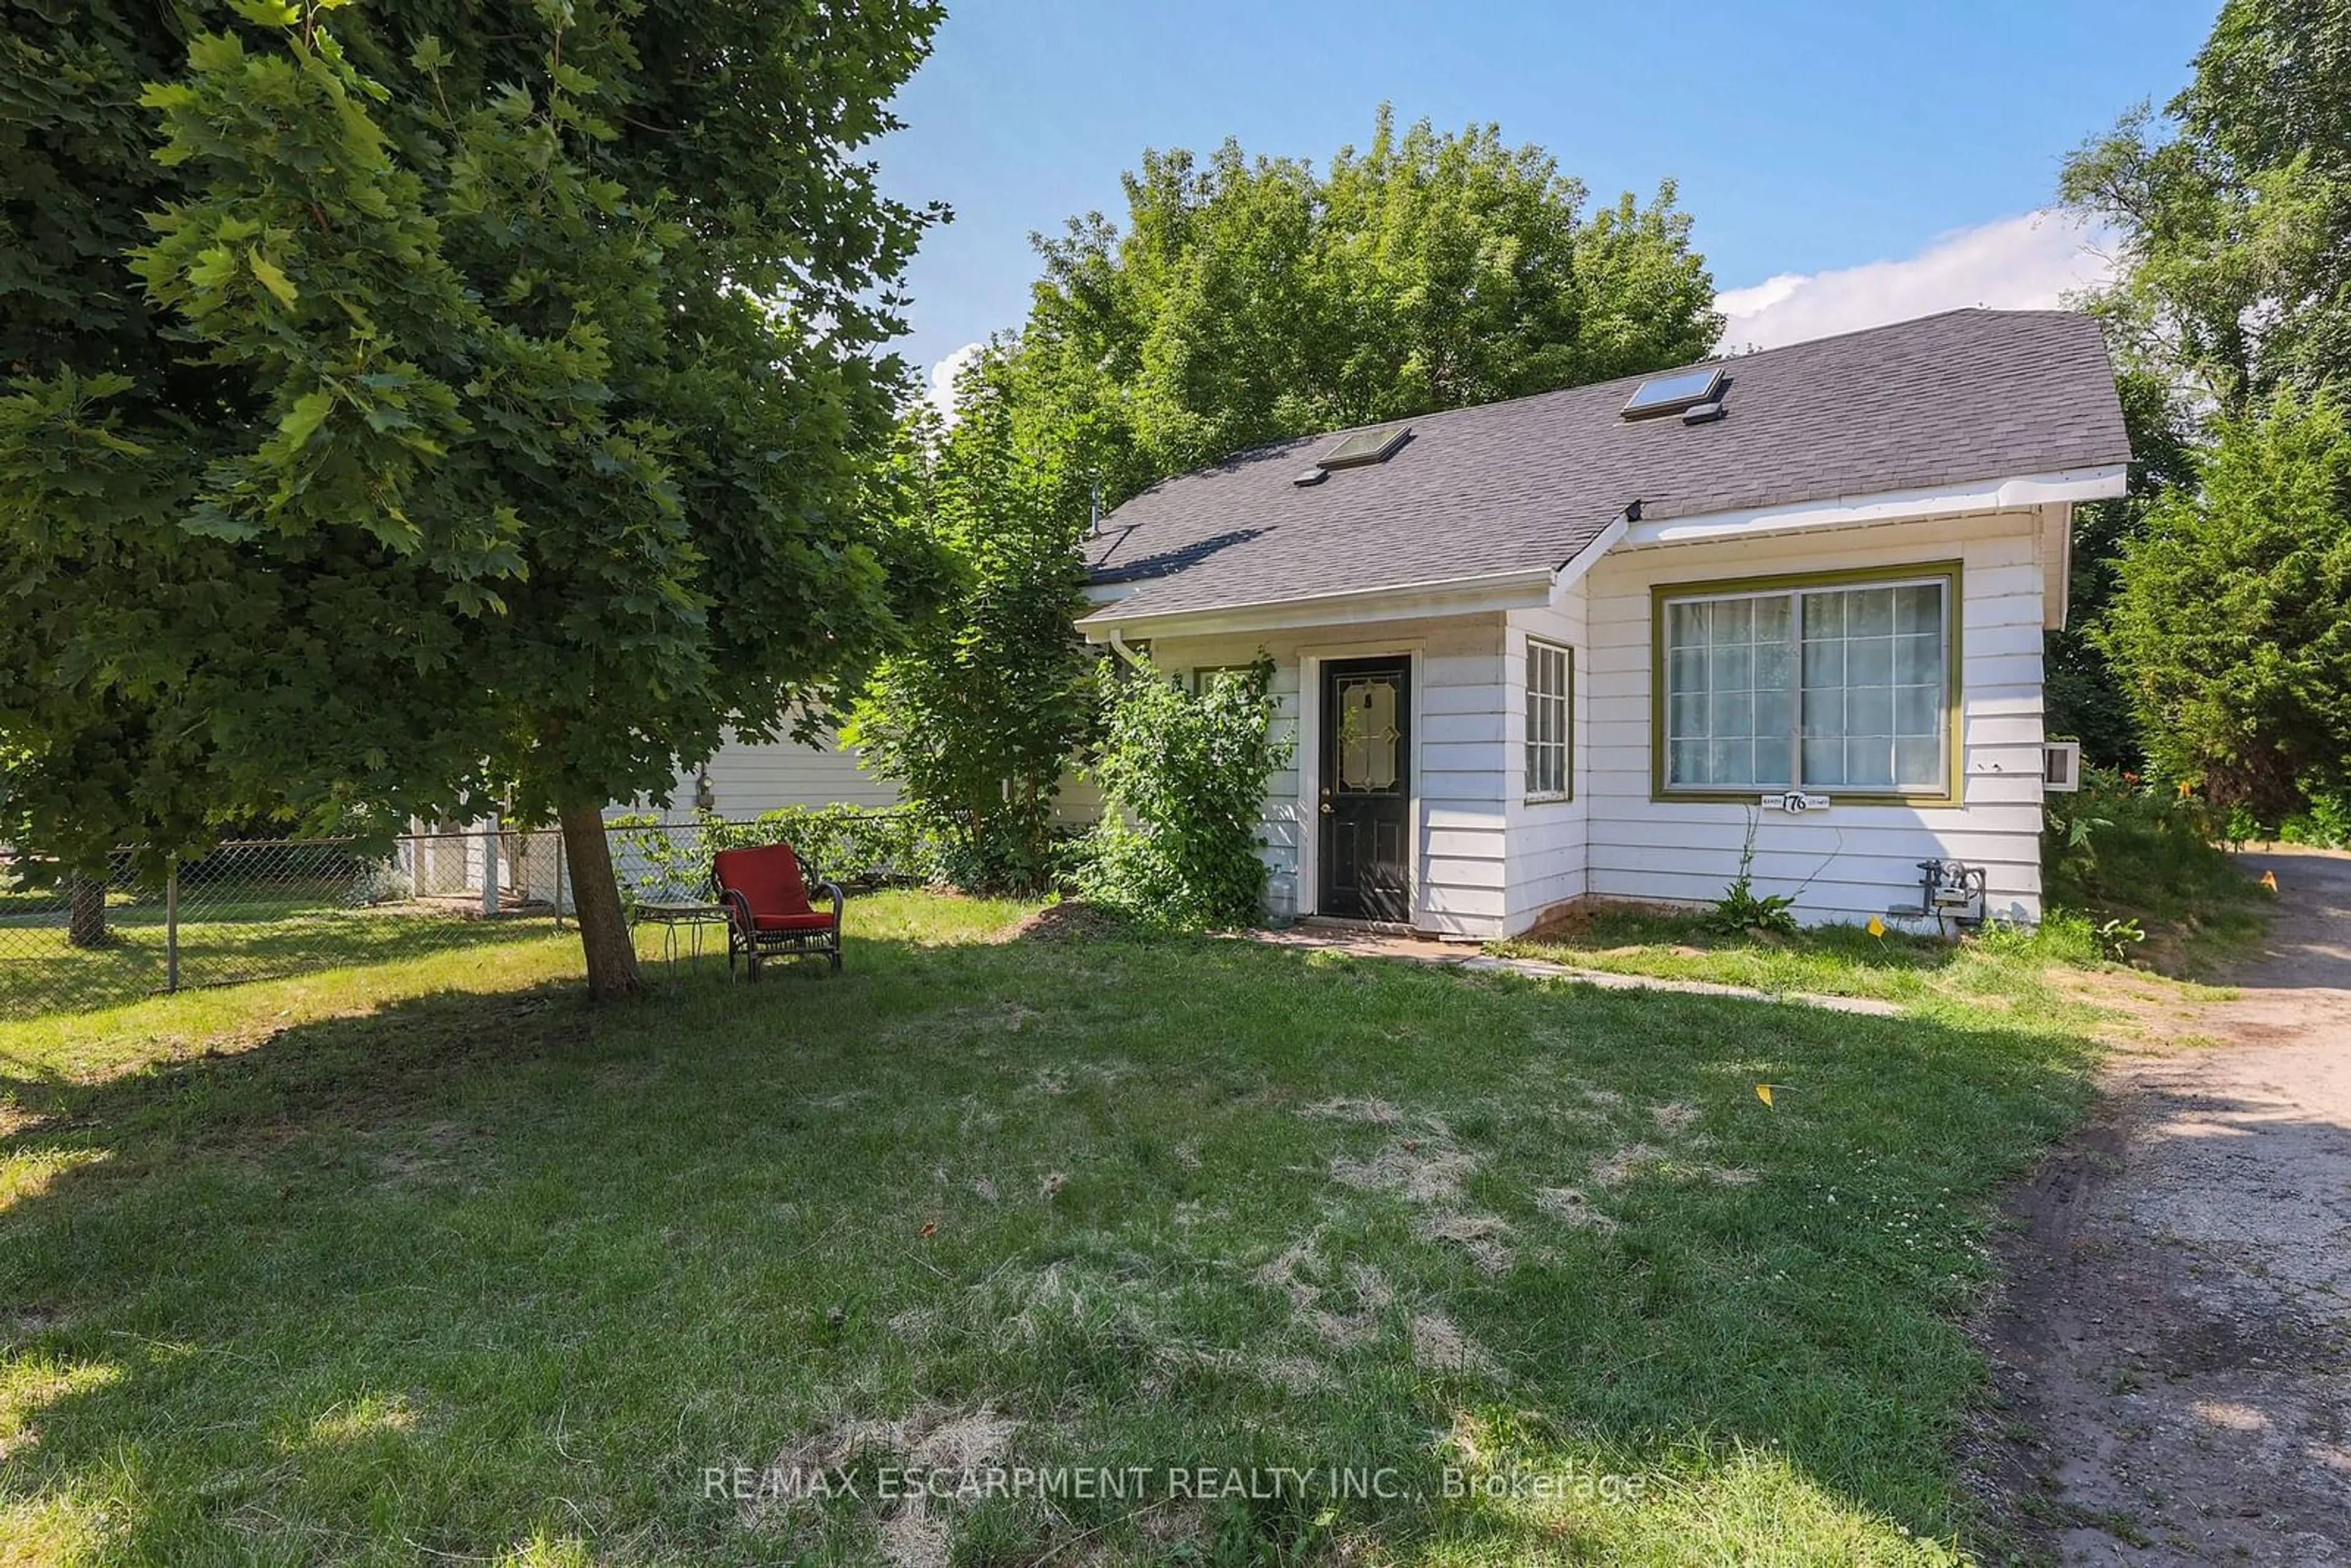 Frontside or backside of a home for 176 Main St, Grimsby Ontario L3M 1S3